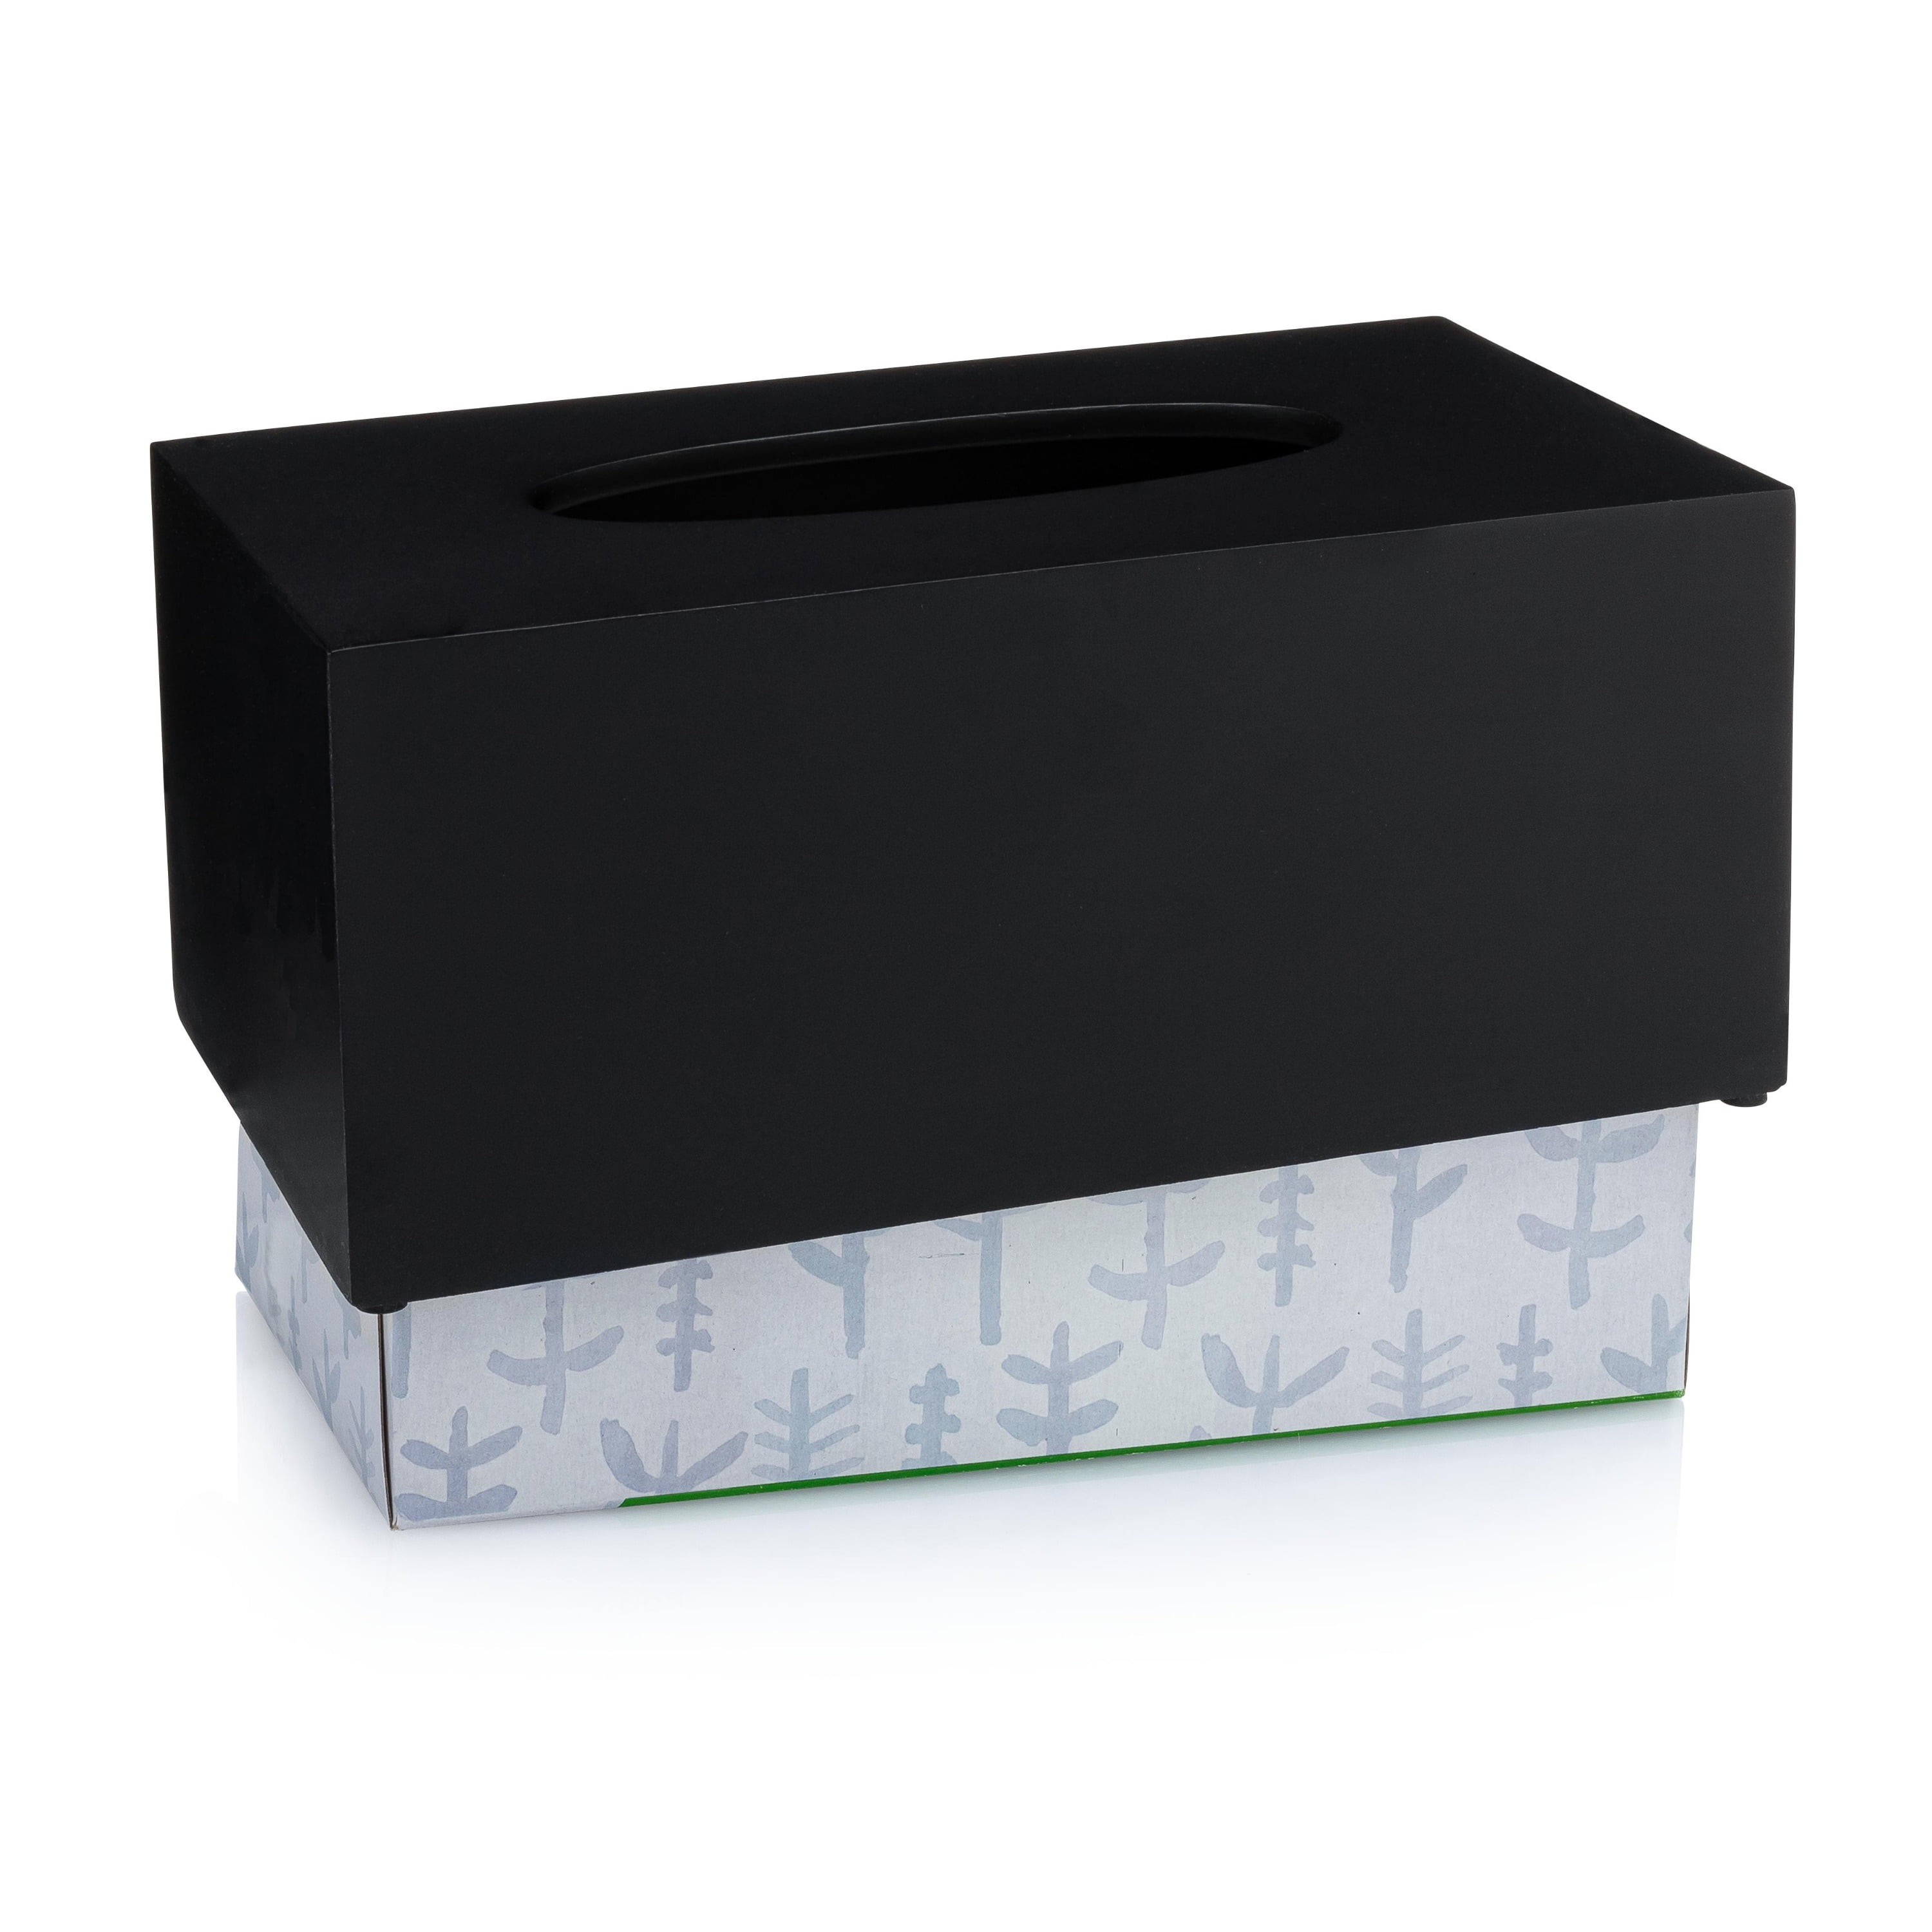 Rubber-Coated Black Tissue Box Cover + Reviews